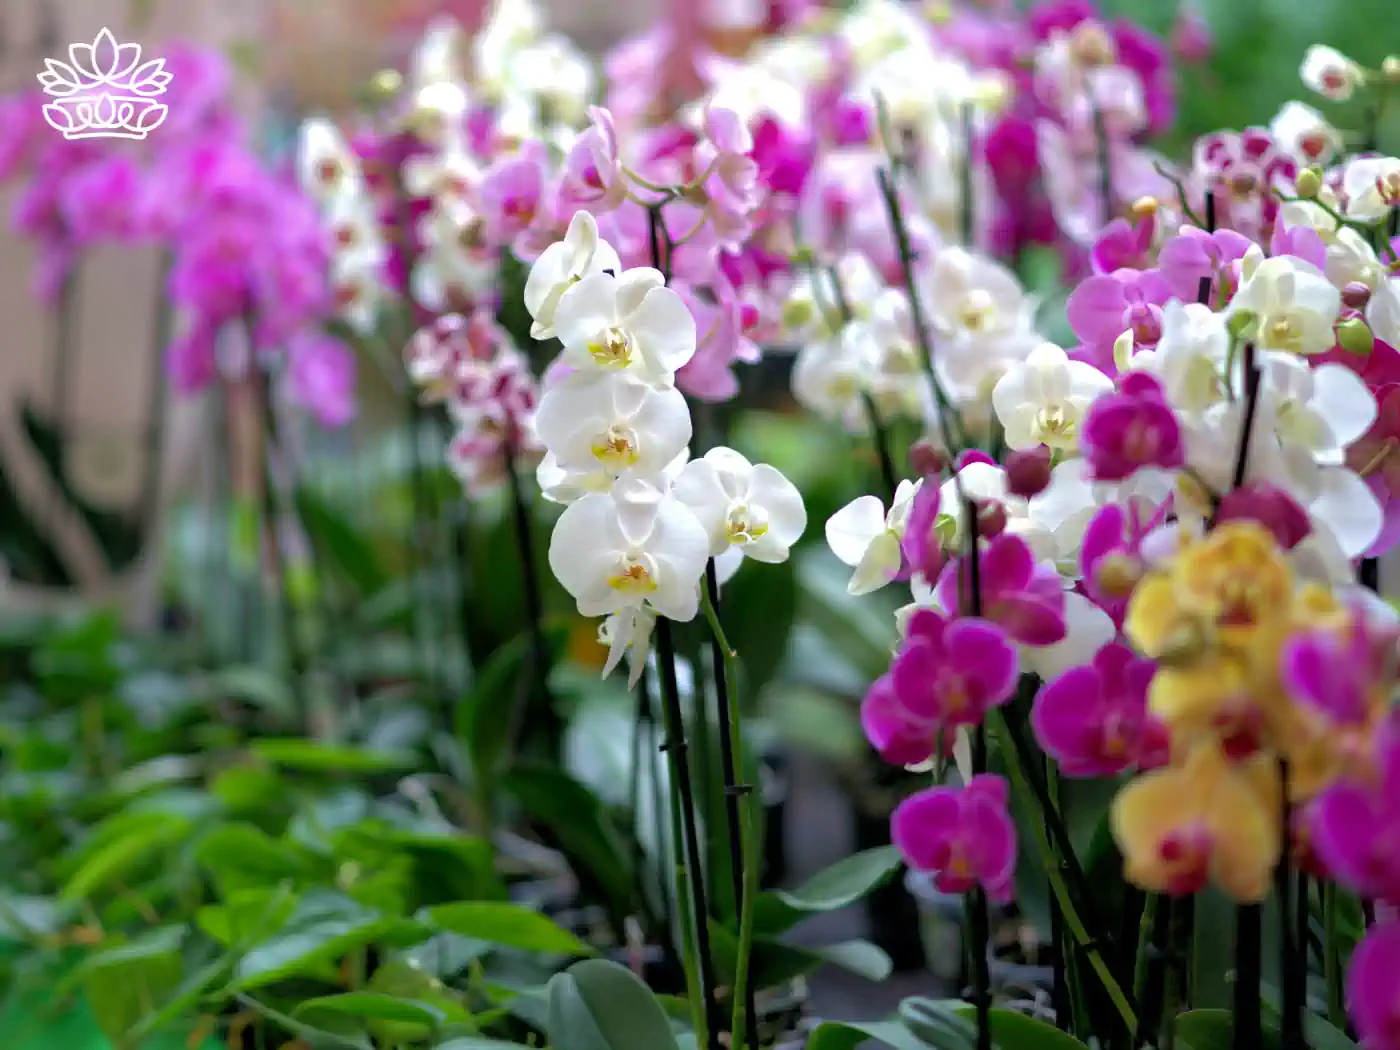 An array of various coloured orchids, including pink, white, and yellow, in a garden setting. Fabulous Flowers and Gifts - Orchids Collection.